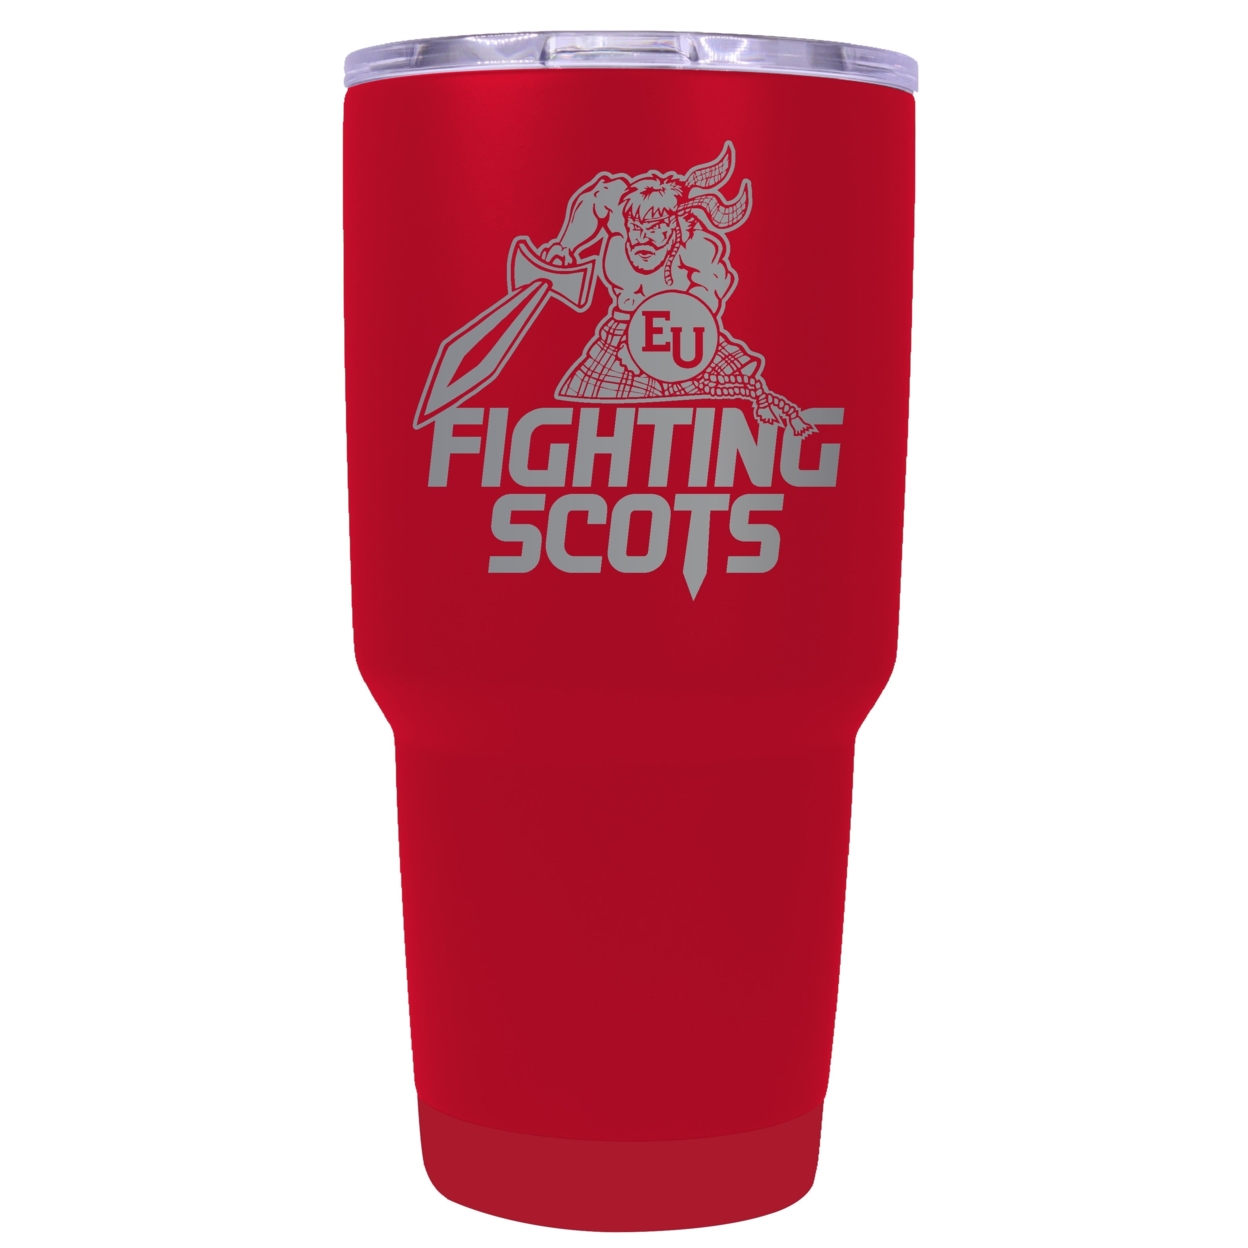 Edinboro University 24 Oz Laser Engraved Stainless Steel Insulated Tumbler - Choose Your Color. - Navy